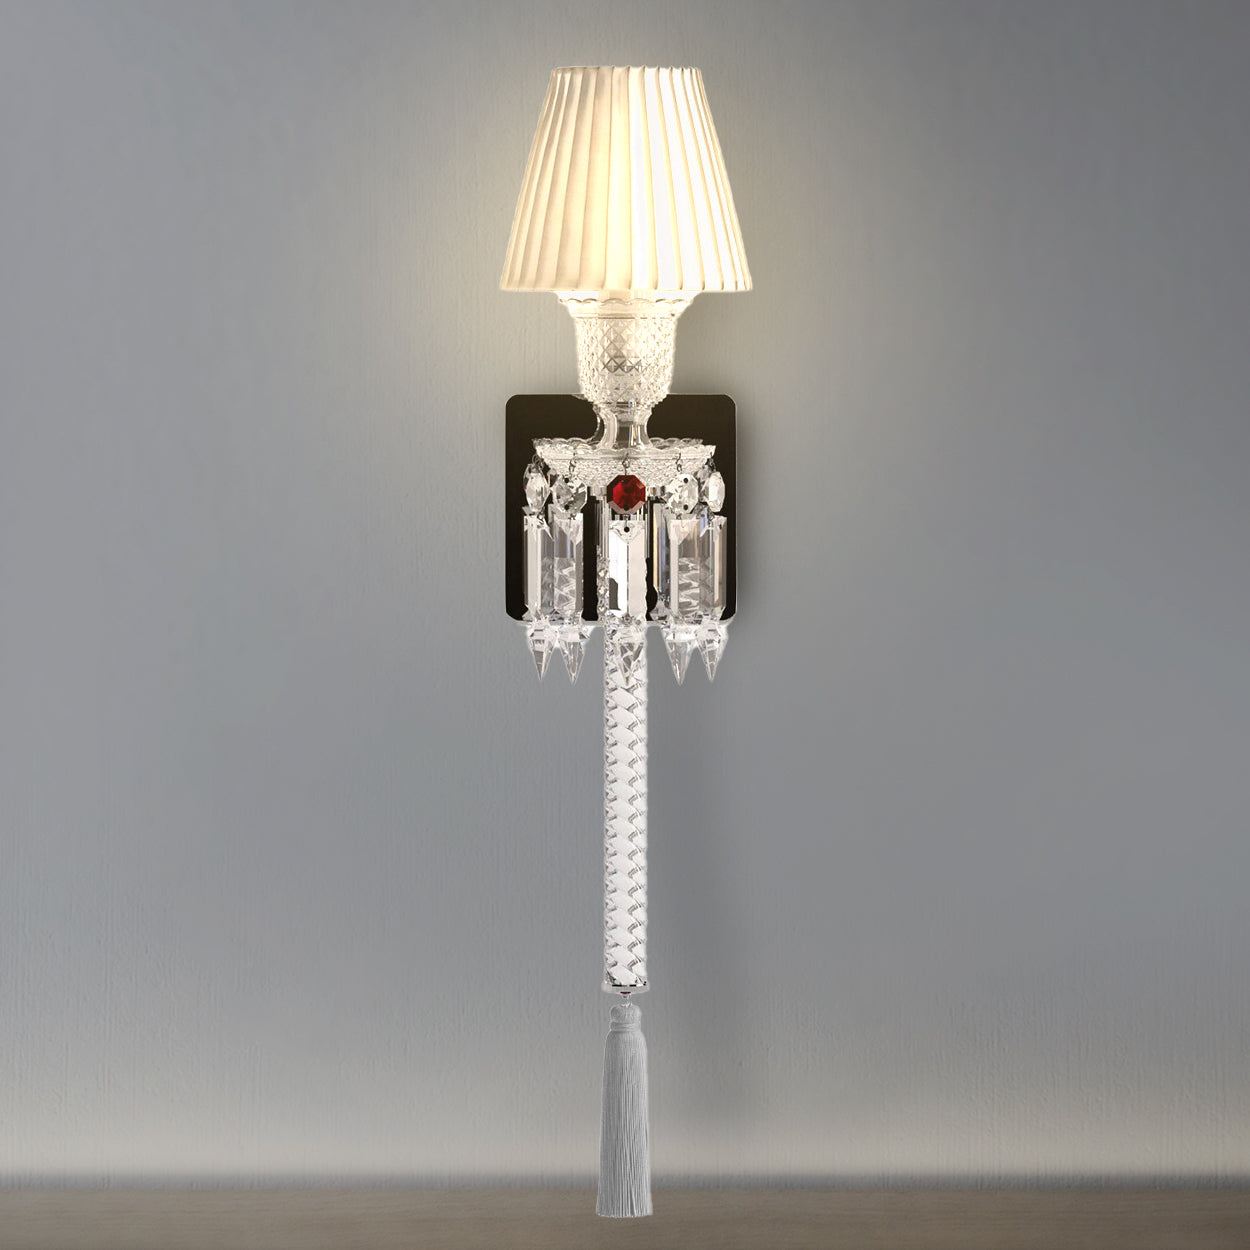 ANKUR BACCA TORCH WALL SCONCE LIGHT